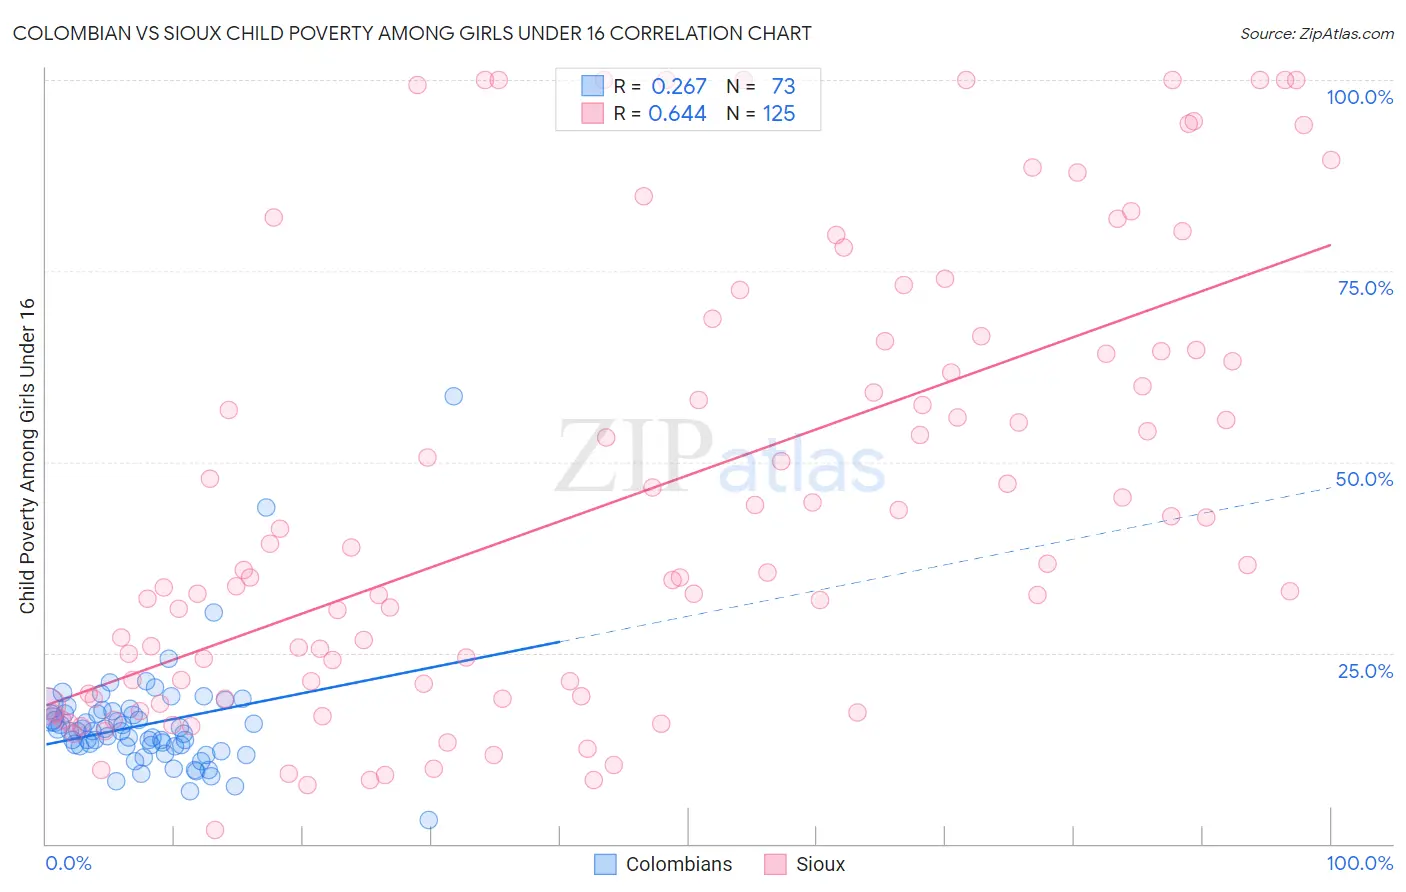 Colombian vs Sioux Child Poverty Among Girls Under 16